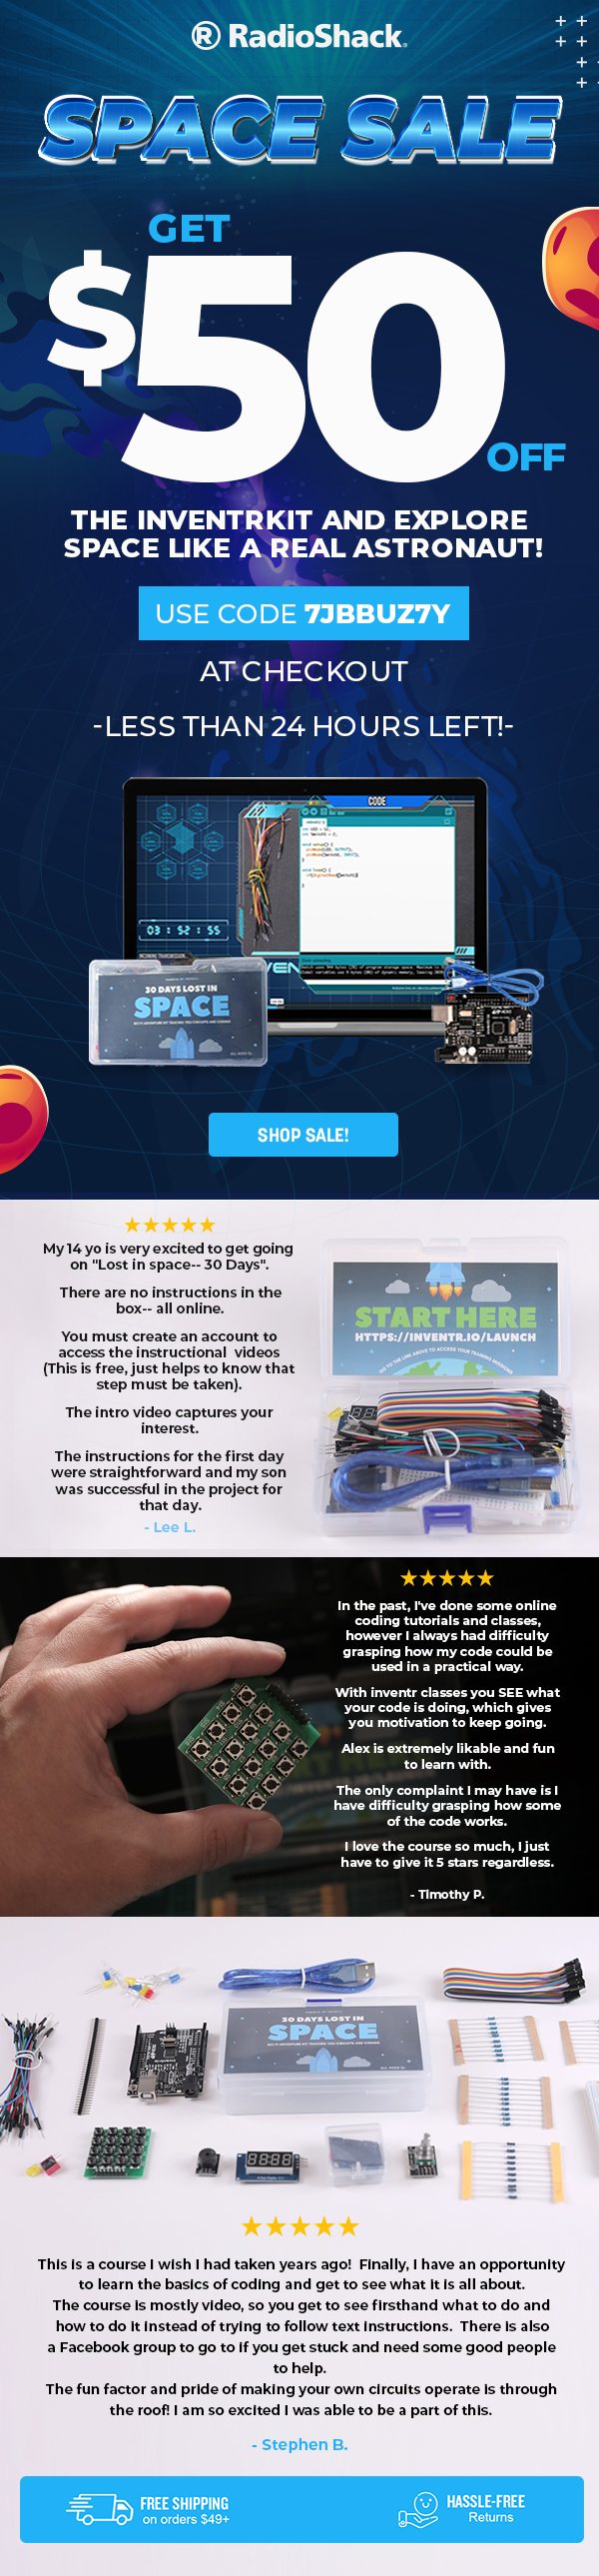 Get $50 OFF The InventrKit And Explore Space Like A Real Astronaut!